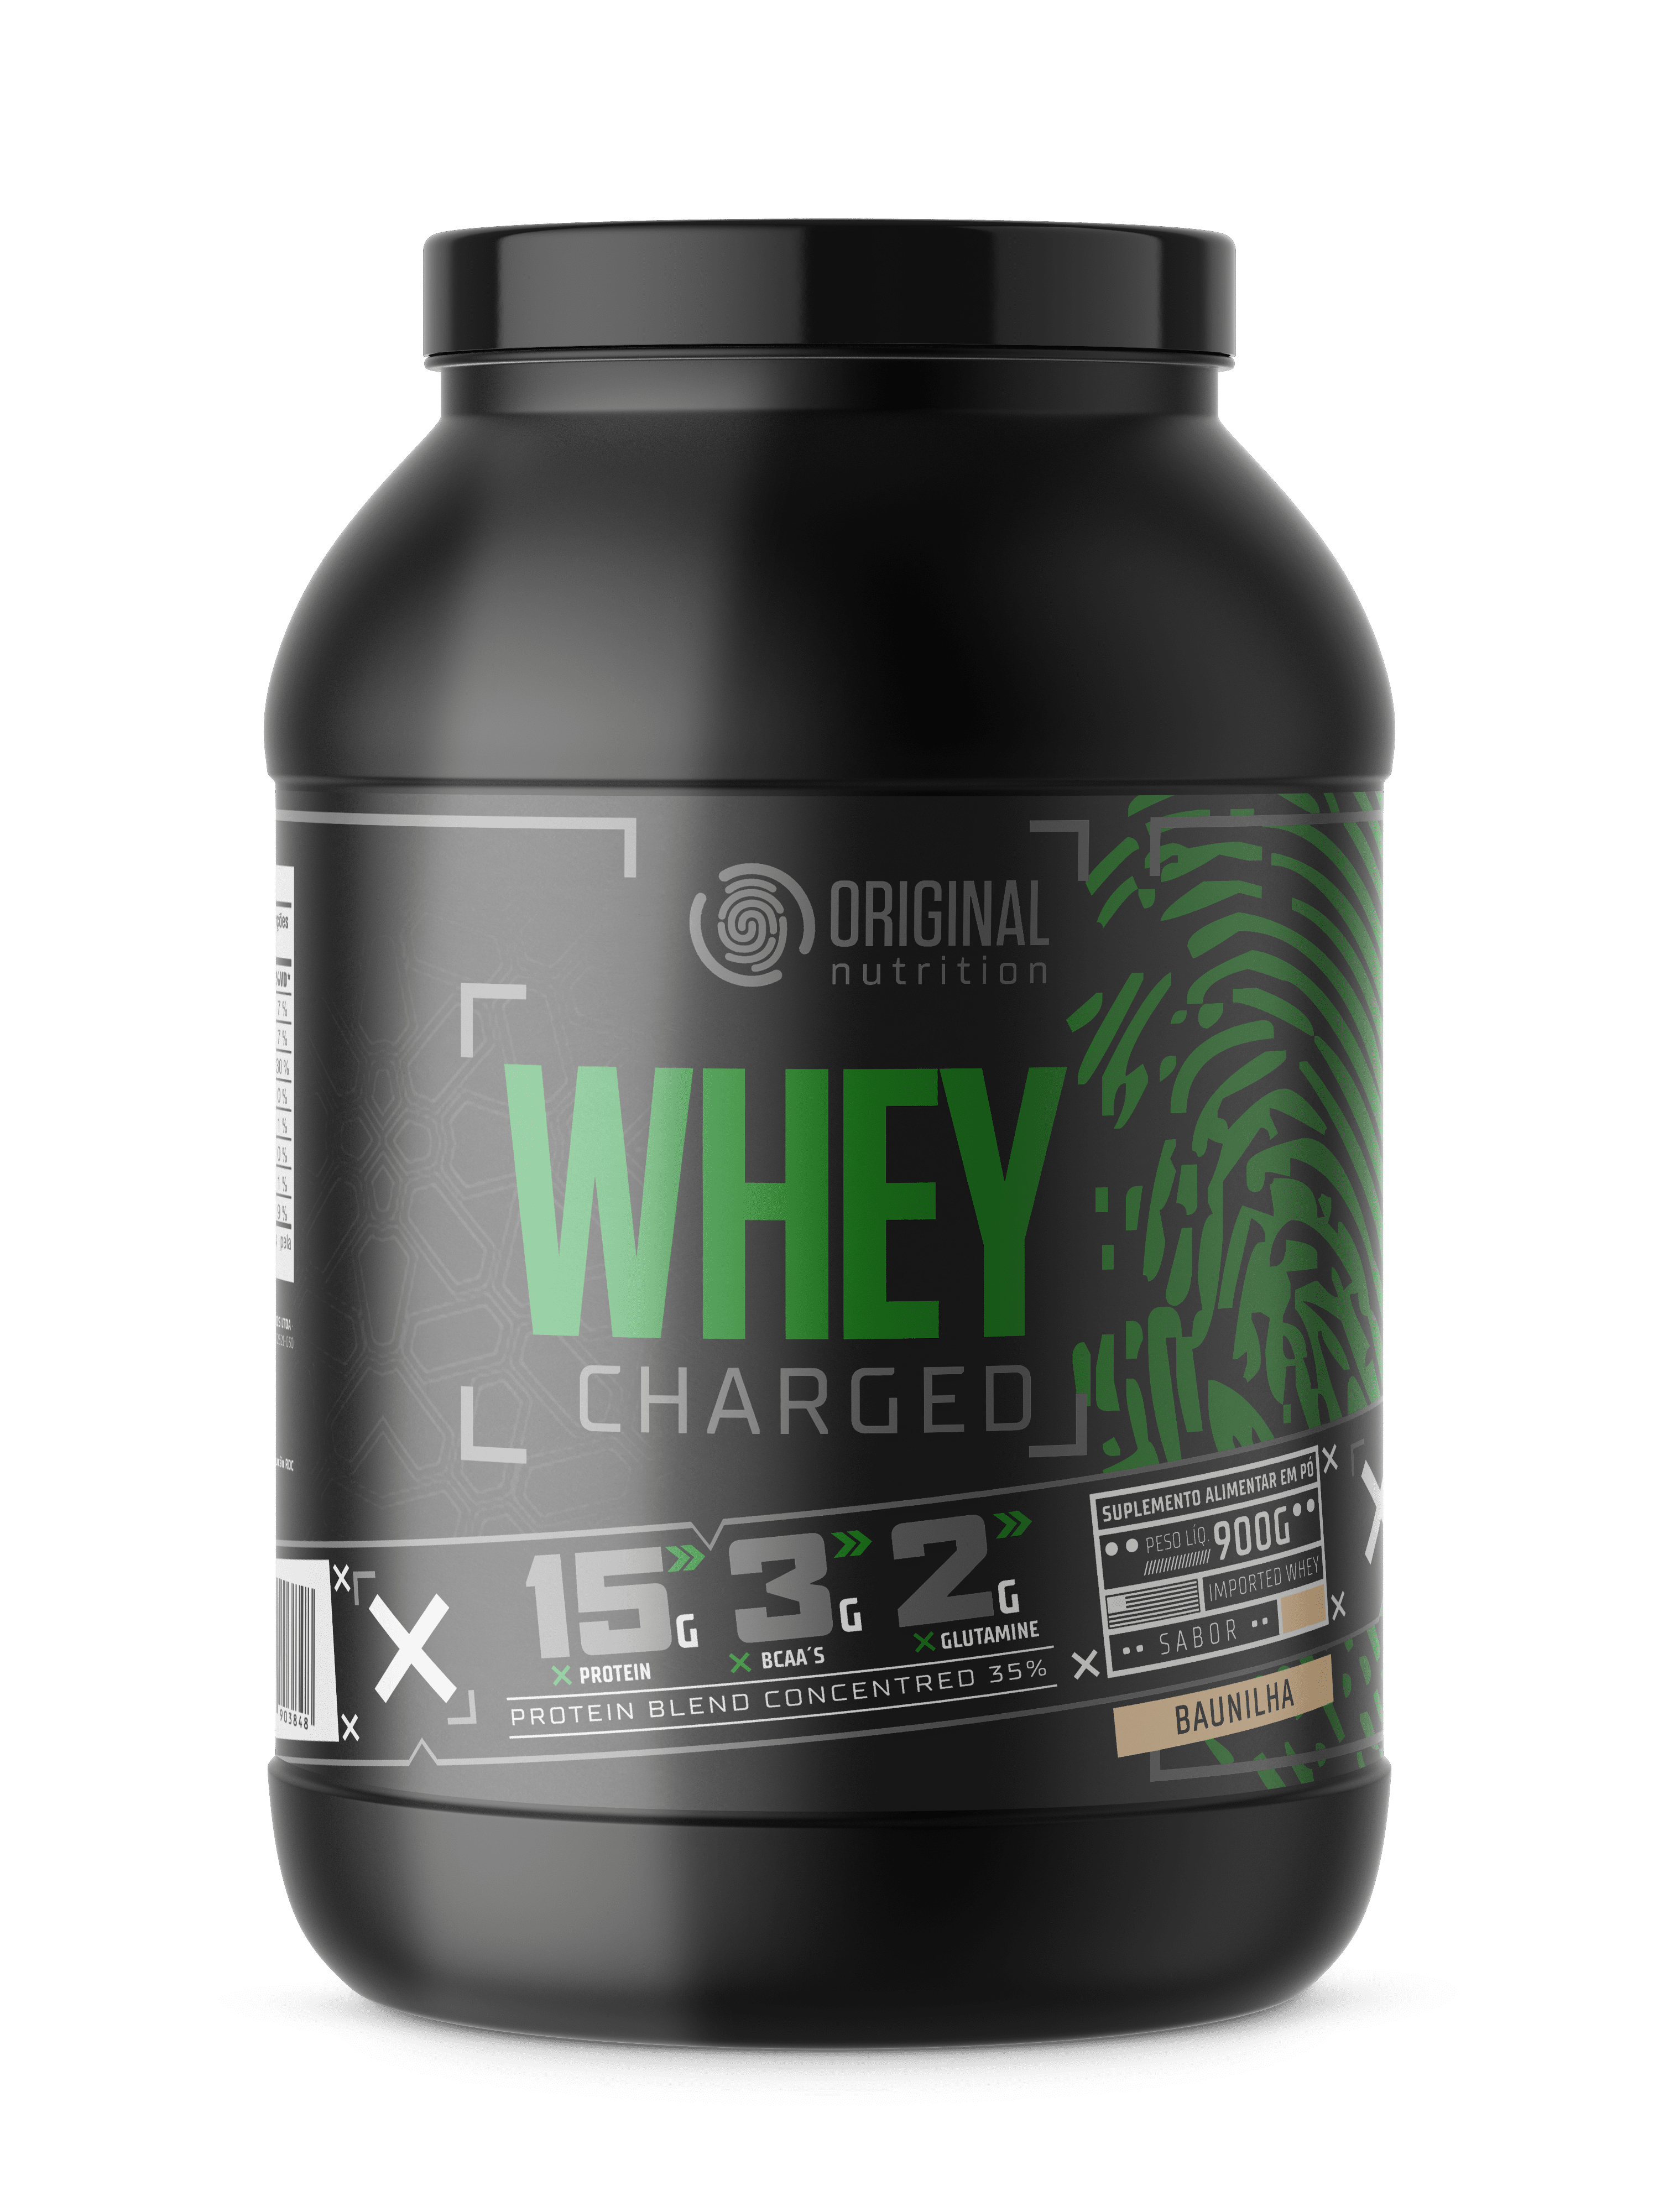 Whey Charged 900g - Original Nutrition